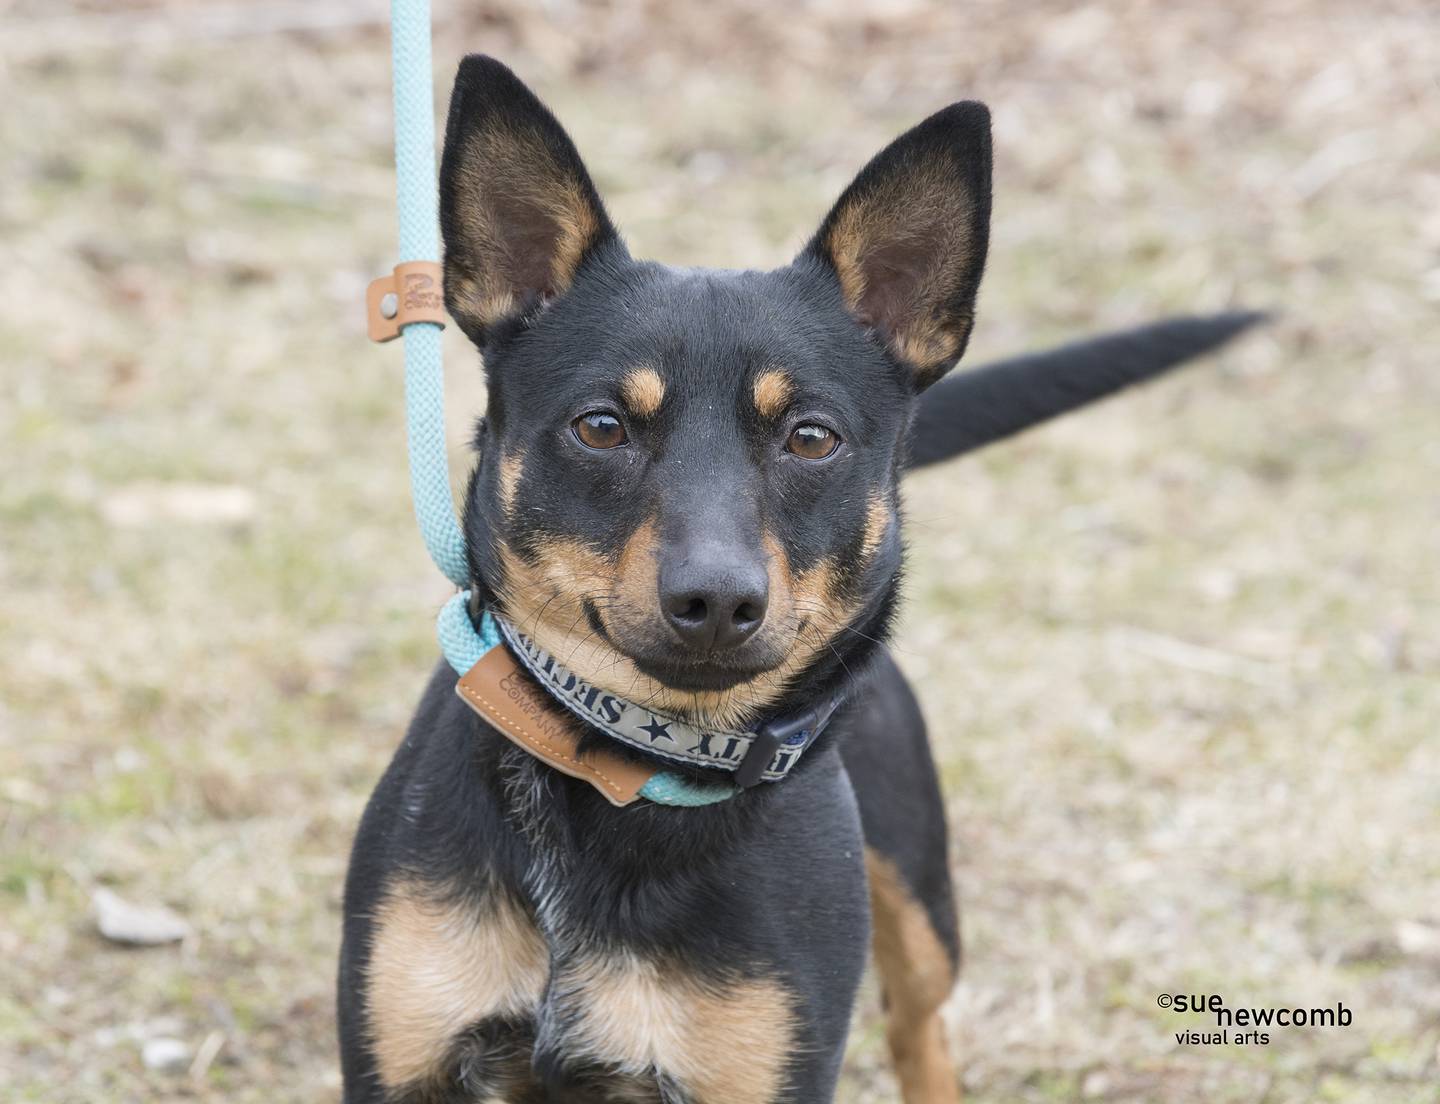 Buddy is a miniature pinscher/terrier mix who was an owner-surrender from downstate. He is super sweet and very excitable and seems to do well with other dogs. Contact the Will County Humane Society at willcountyhumane.com and follow the instructions for the adoption process.